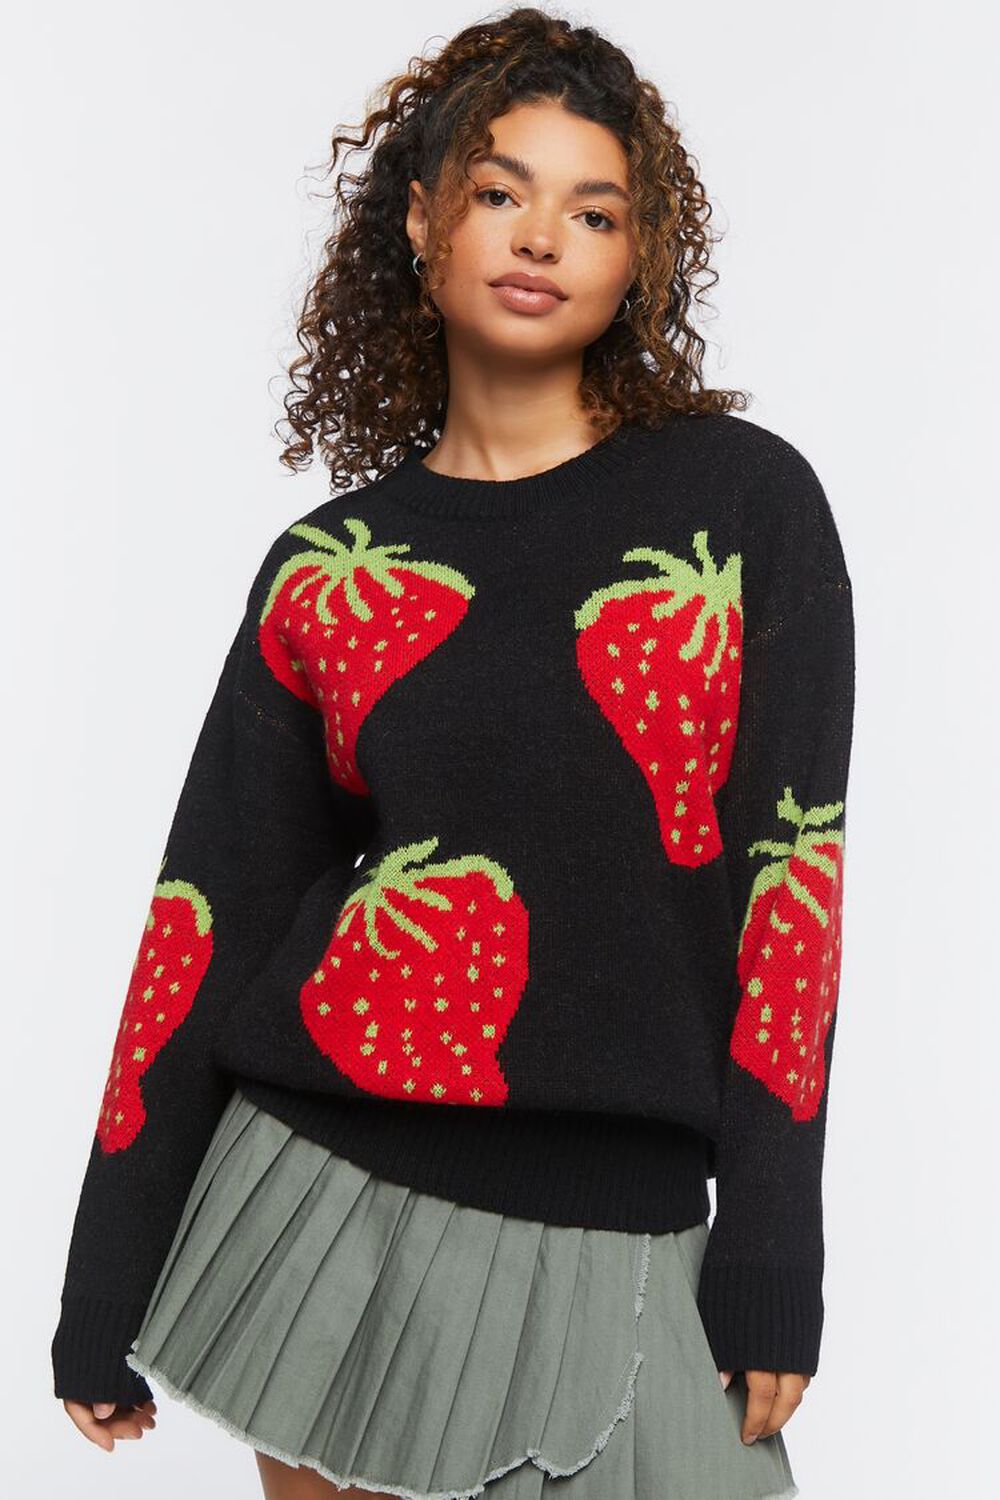 BLACK/RED Strawberry Graphic Sweater, image 1